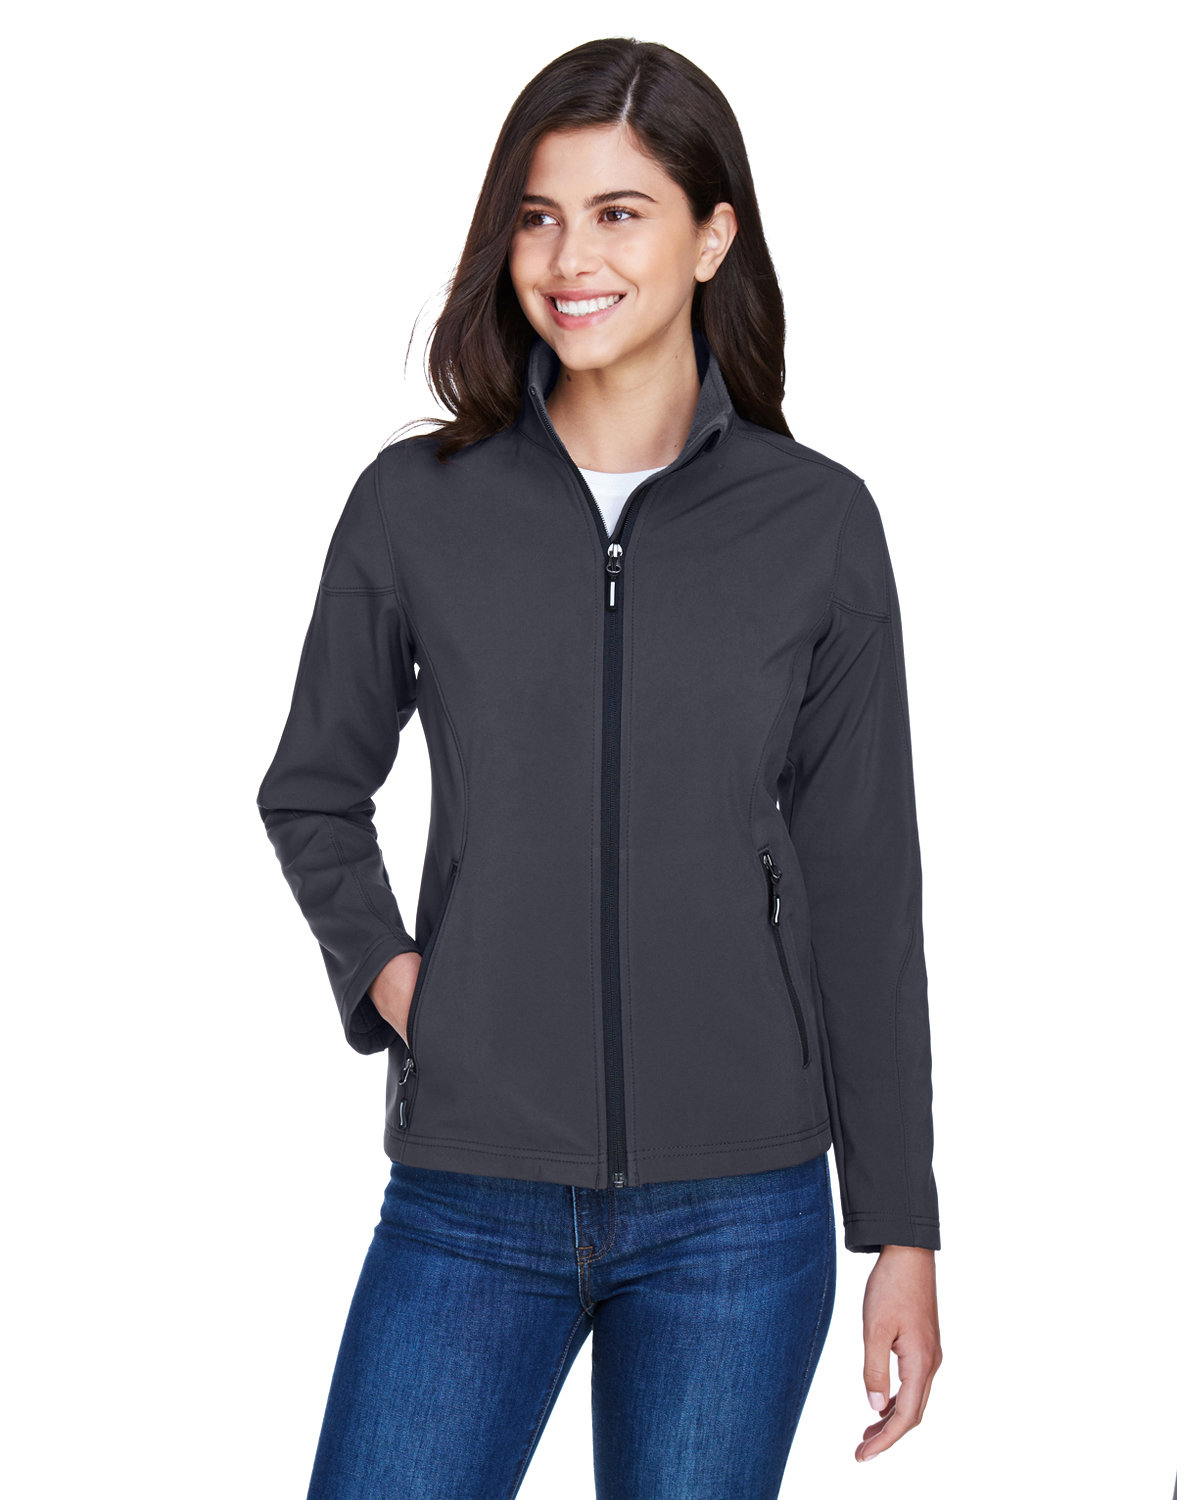 CORE365 Ladies' Cruise Two-Layer Fleece Bonded Soft Shell Jacket CARBON 